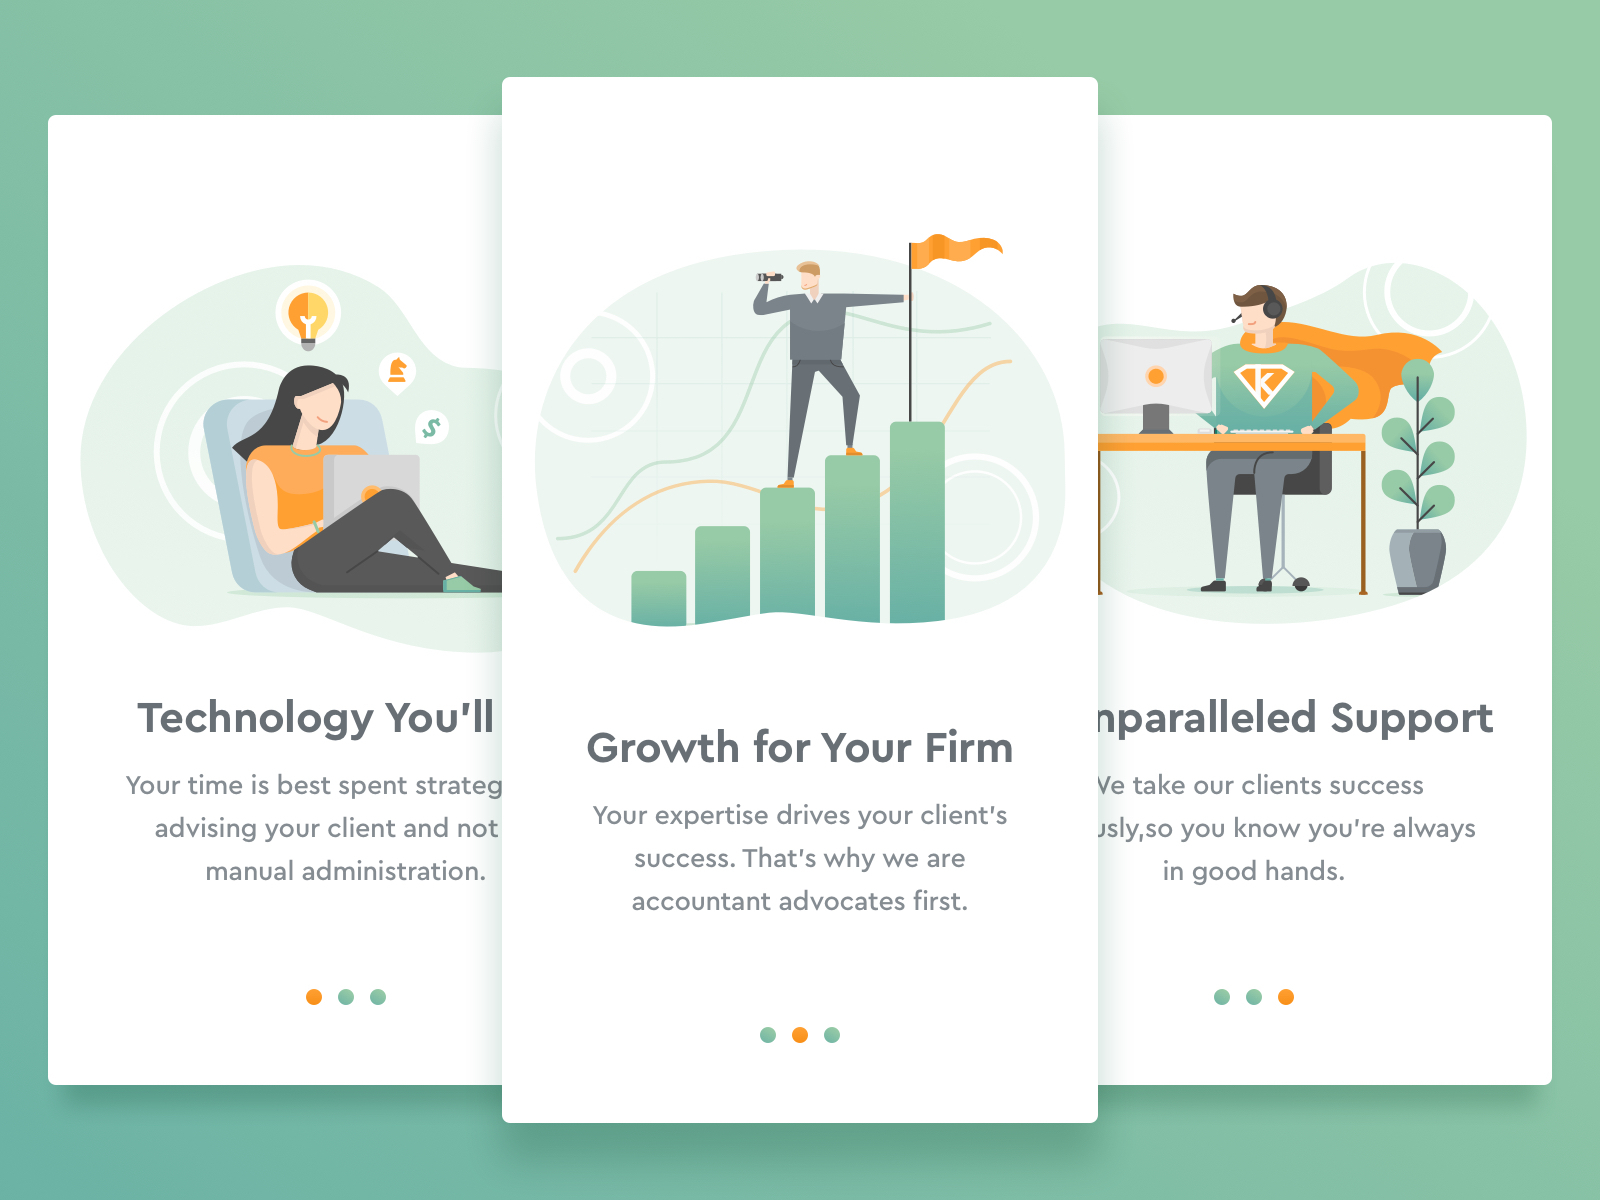 Featured Card / Marketing Tasks for Payroll, HR SAAS company accountants company strategy firm growth hr illustrations payroll saas software support user friendly